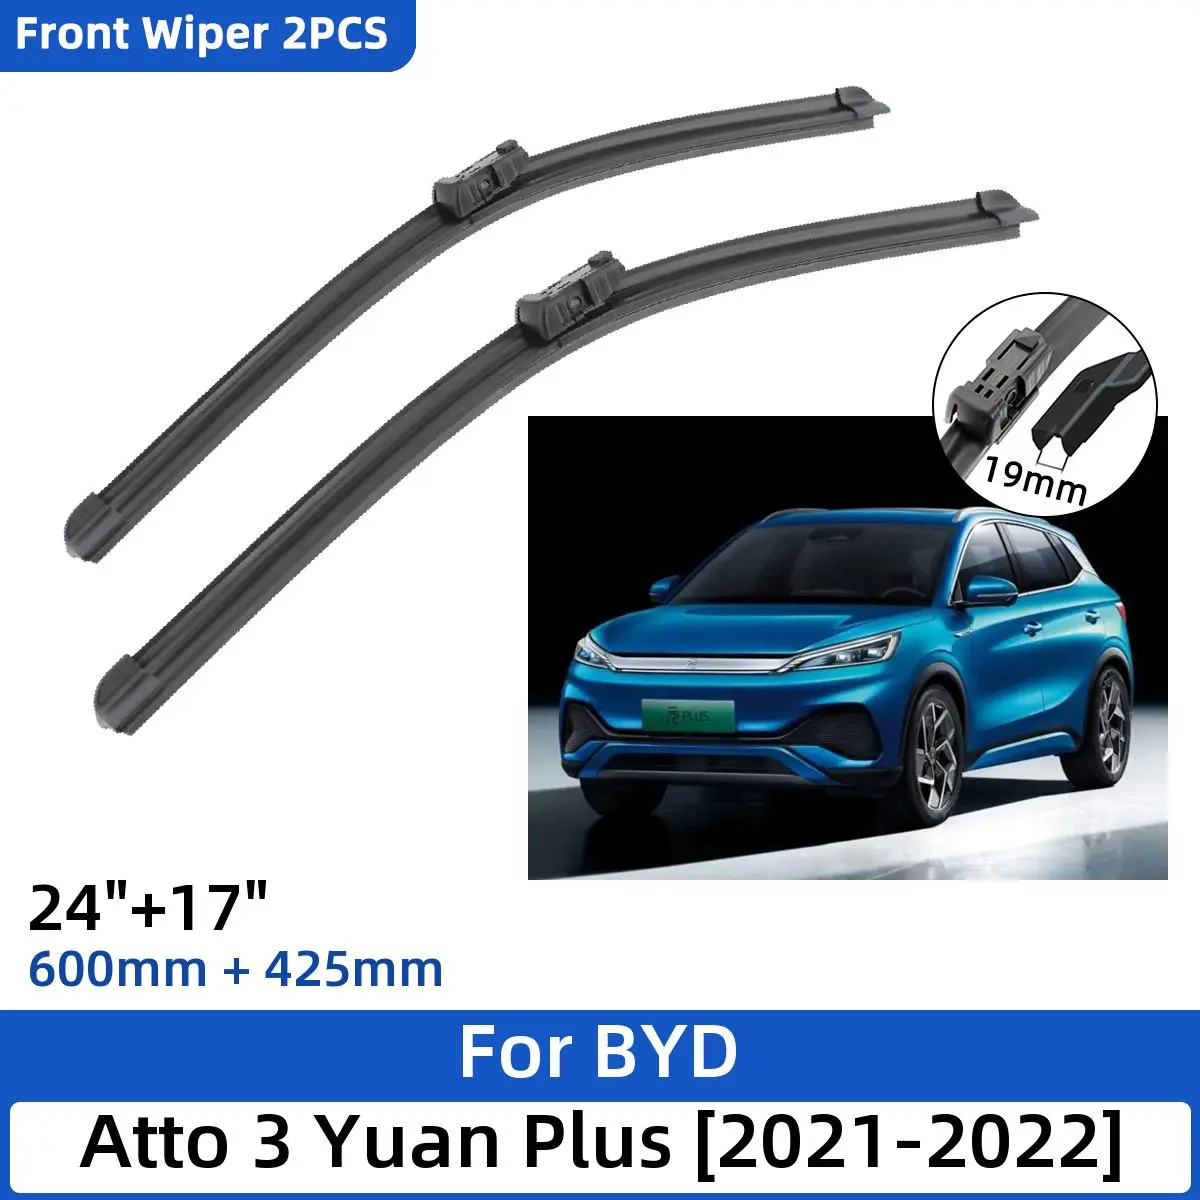 2PCS For BYD Atto 3 Yuan Plus 2021-2022 24"+17" Front Wiper Blades Windshield Windscreen Window Cutter Accessories 2021 2022